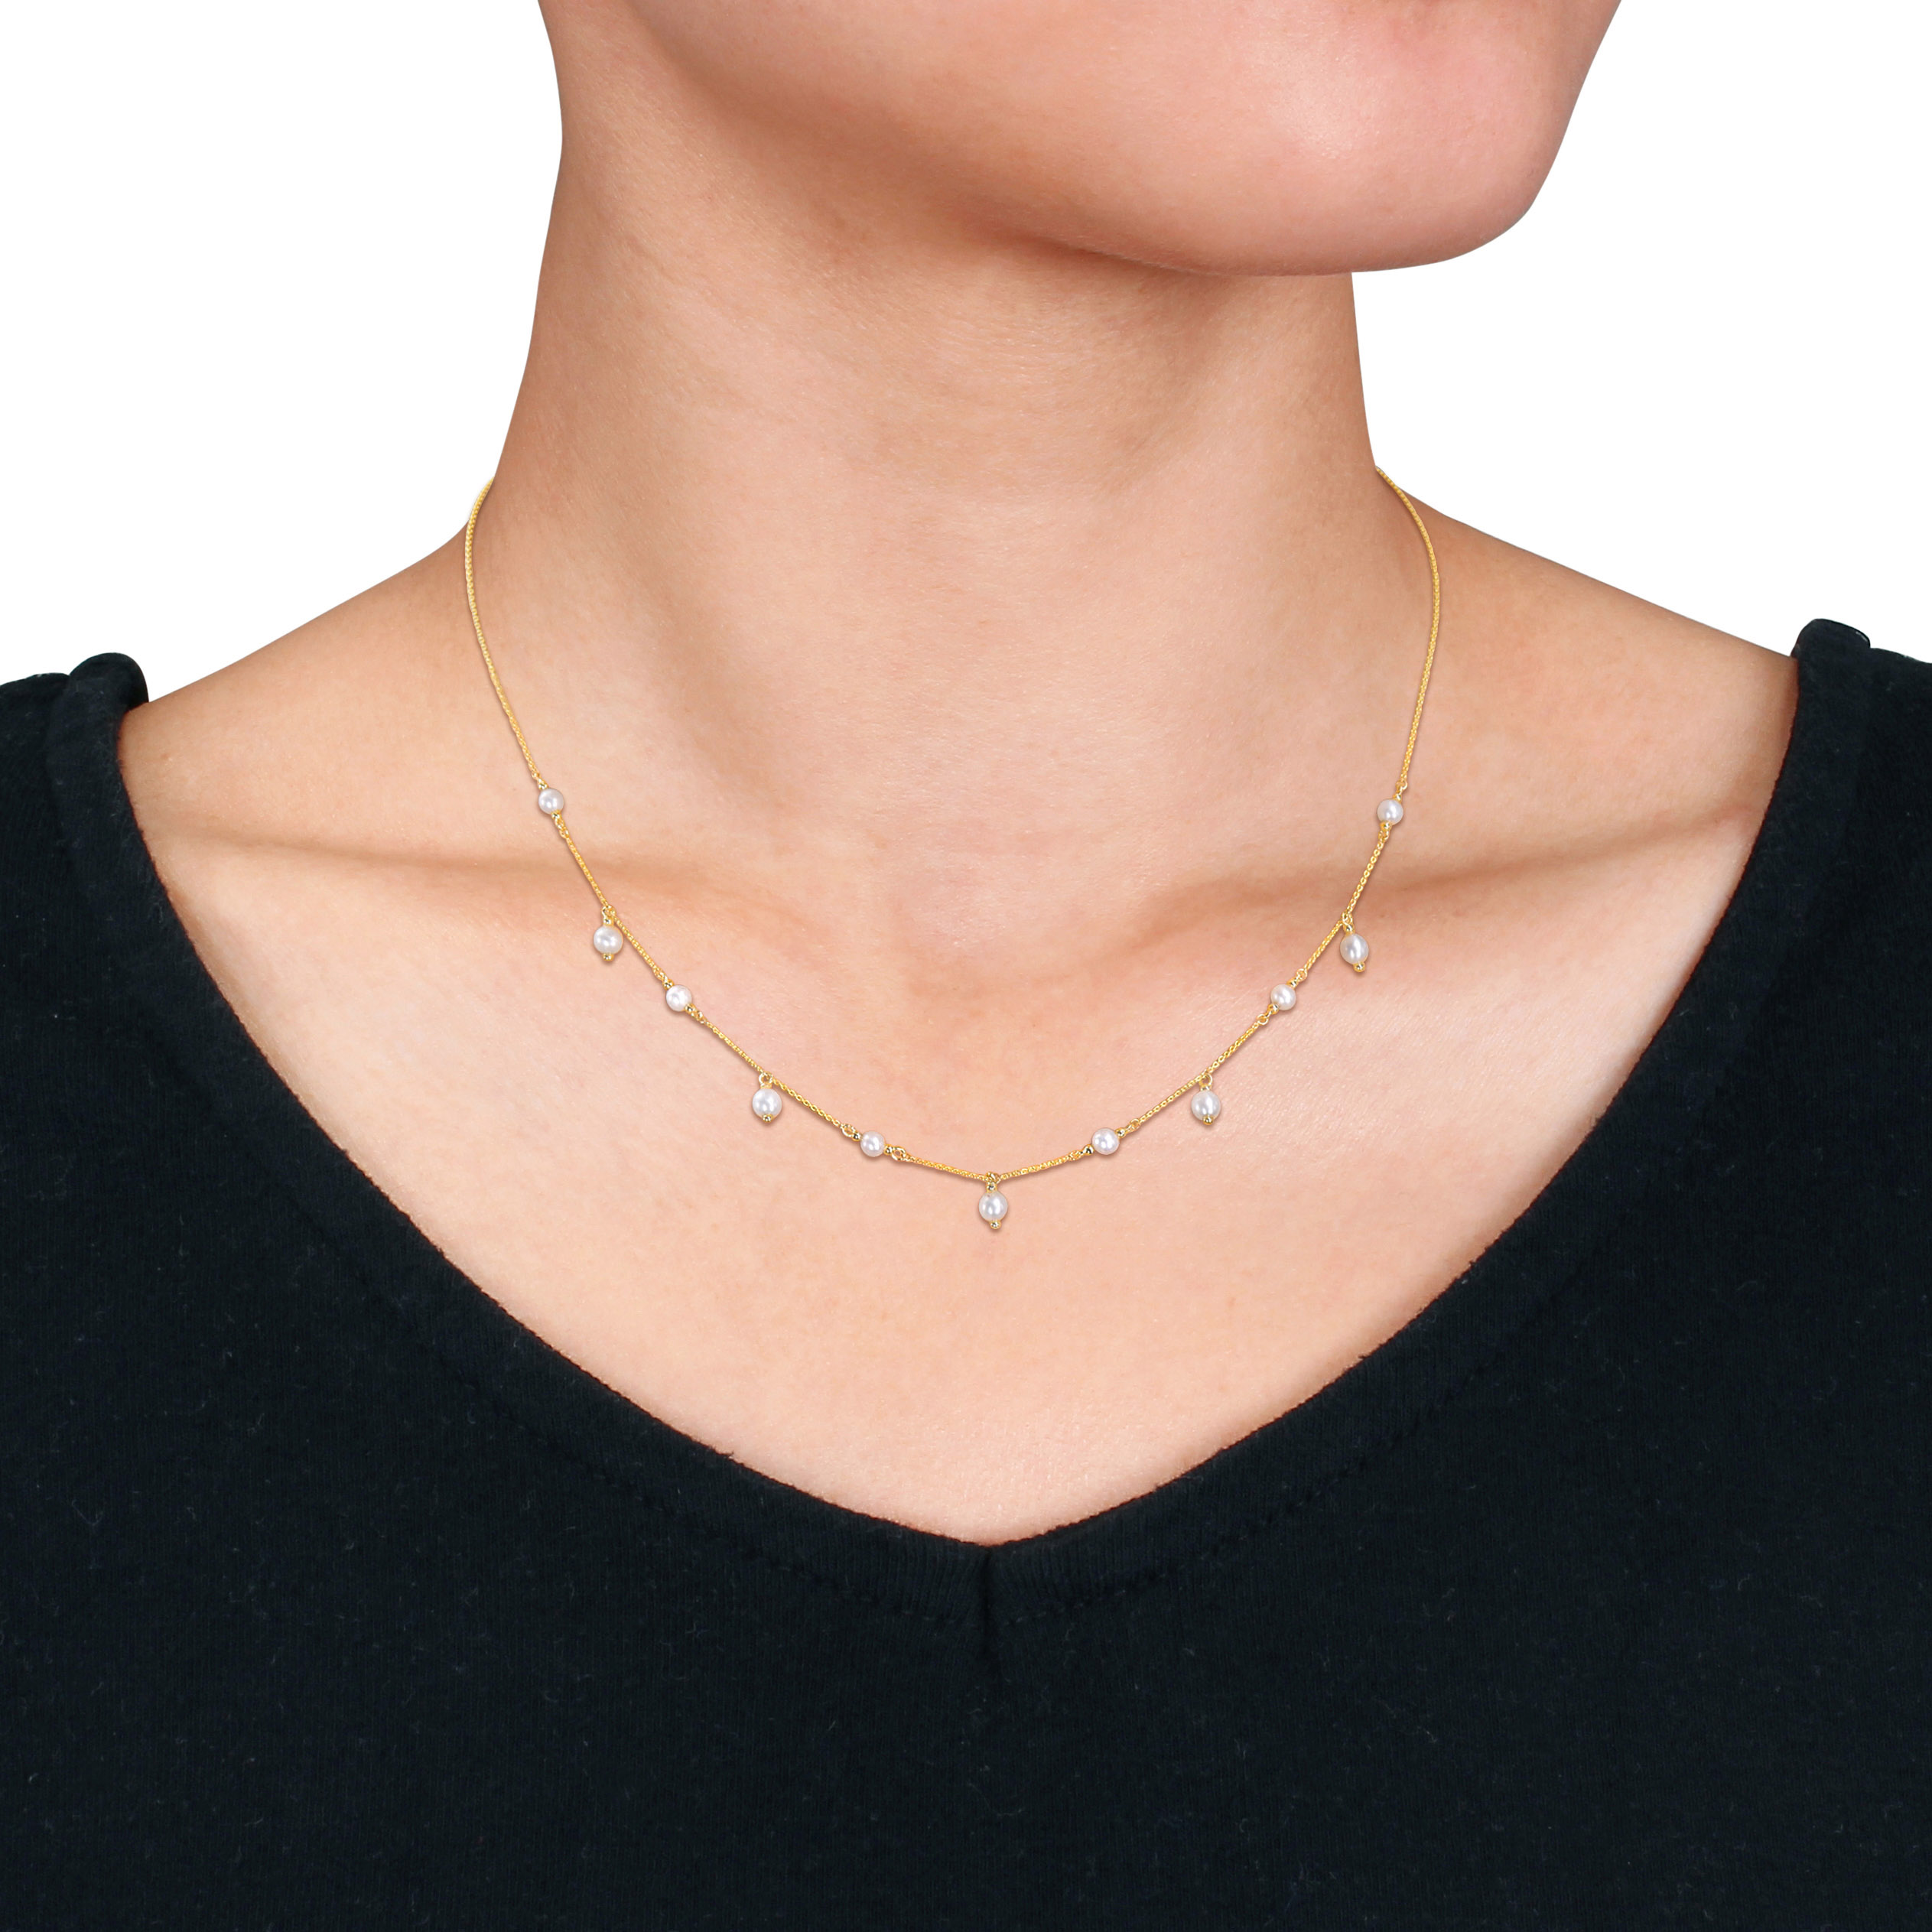 Freshwater Cultured Pearl Station Drop Necklace in 10k Yellow Gold - 16 in + 2 in Ext .